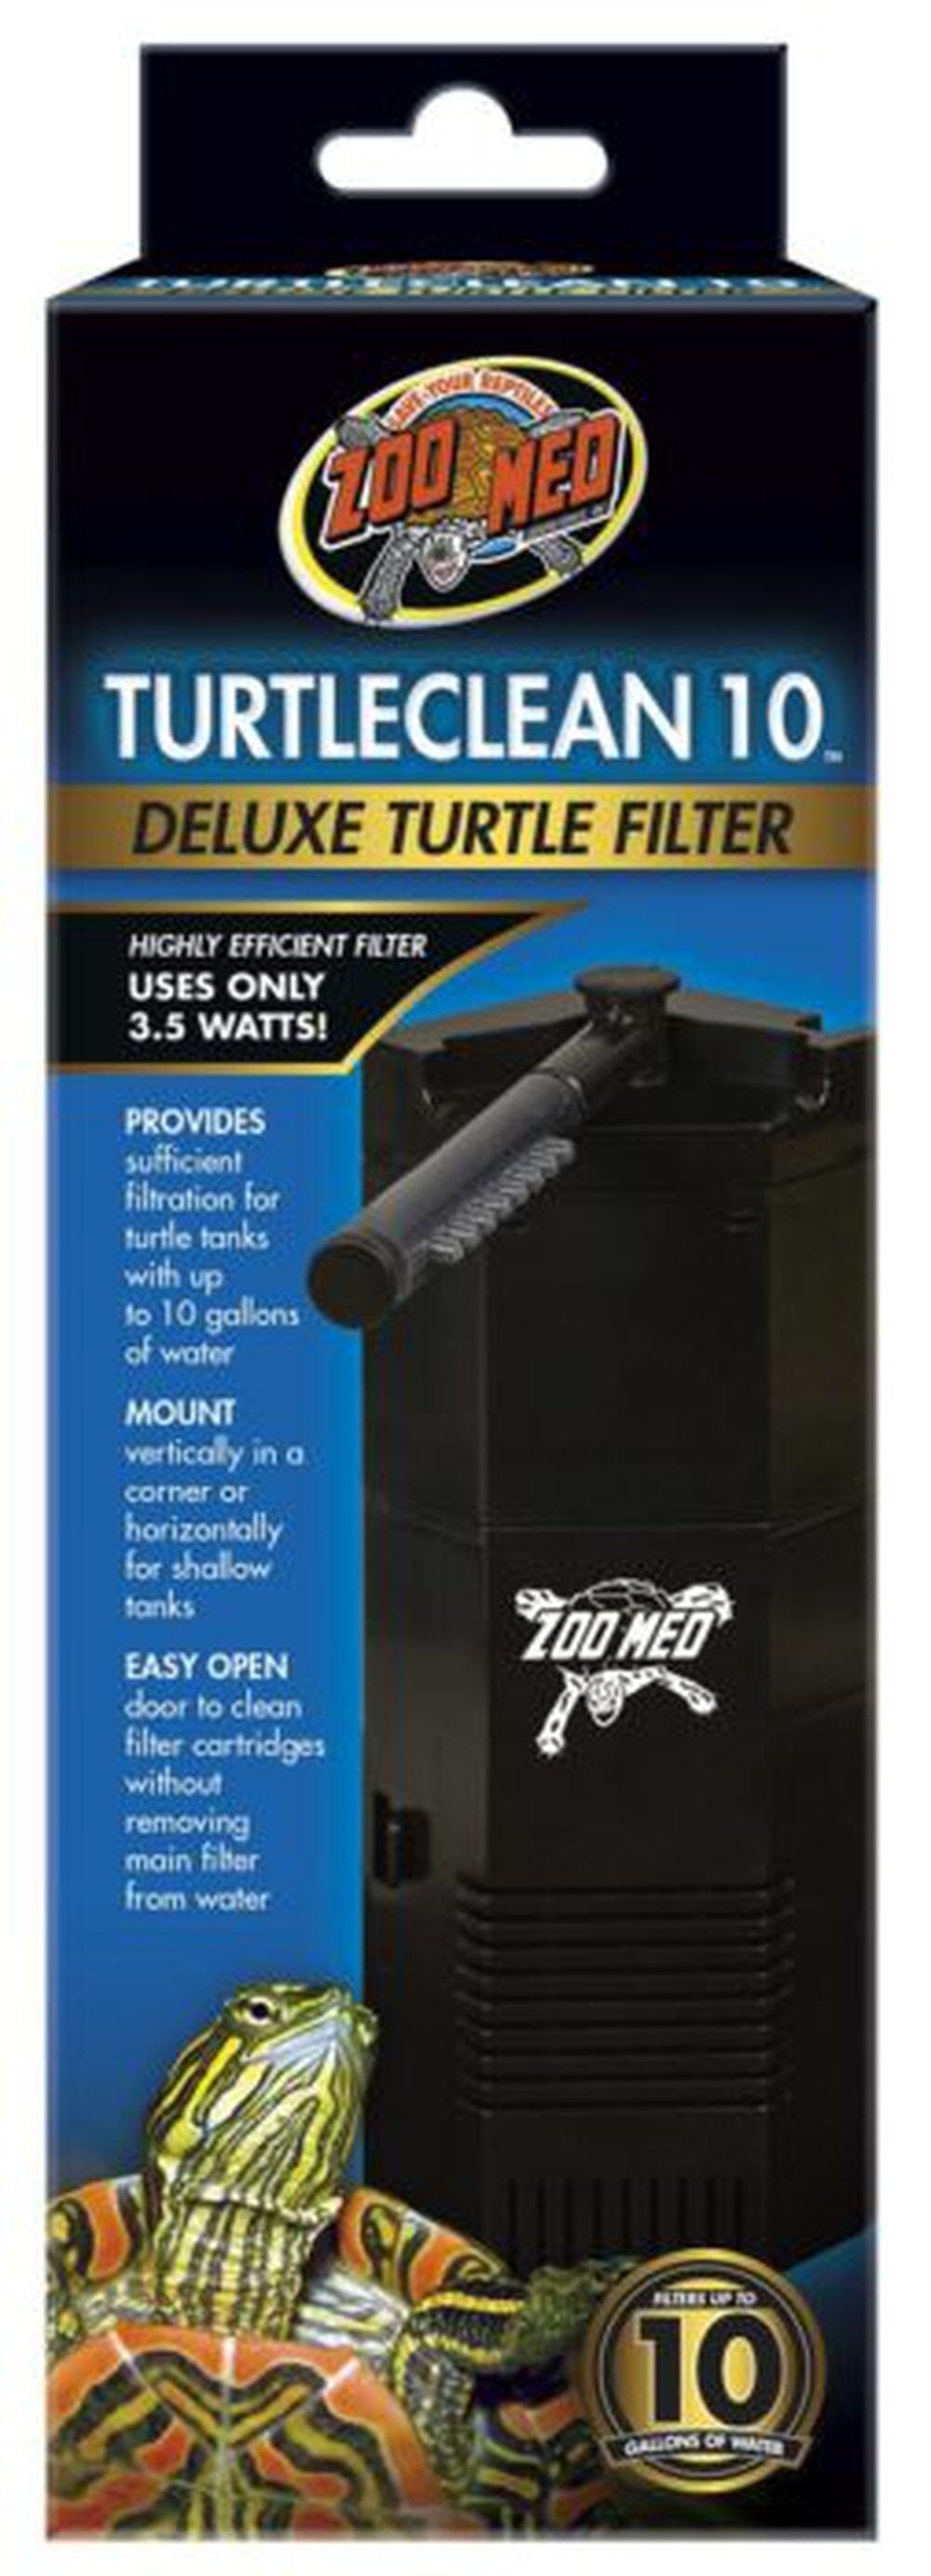 Zoo Med Turtle Clean 10 Deluxe Turtle Filter fish supplies Zoo Med 